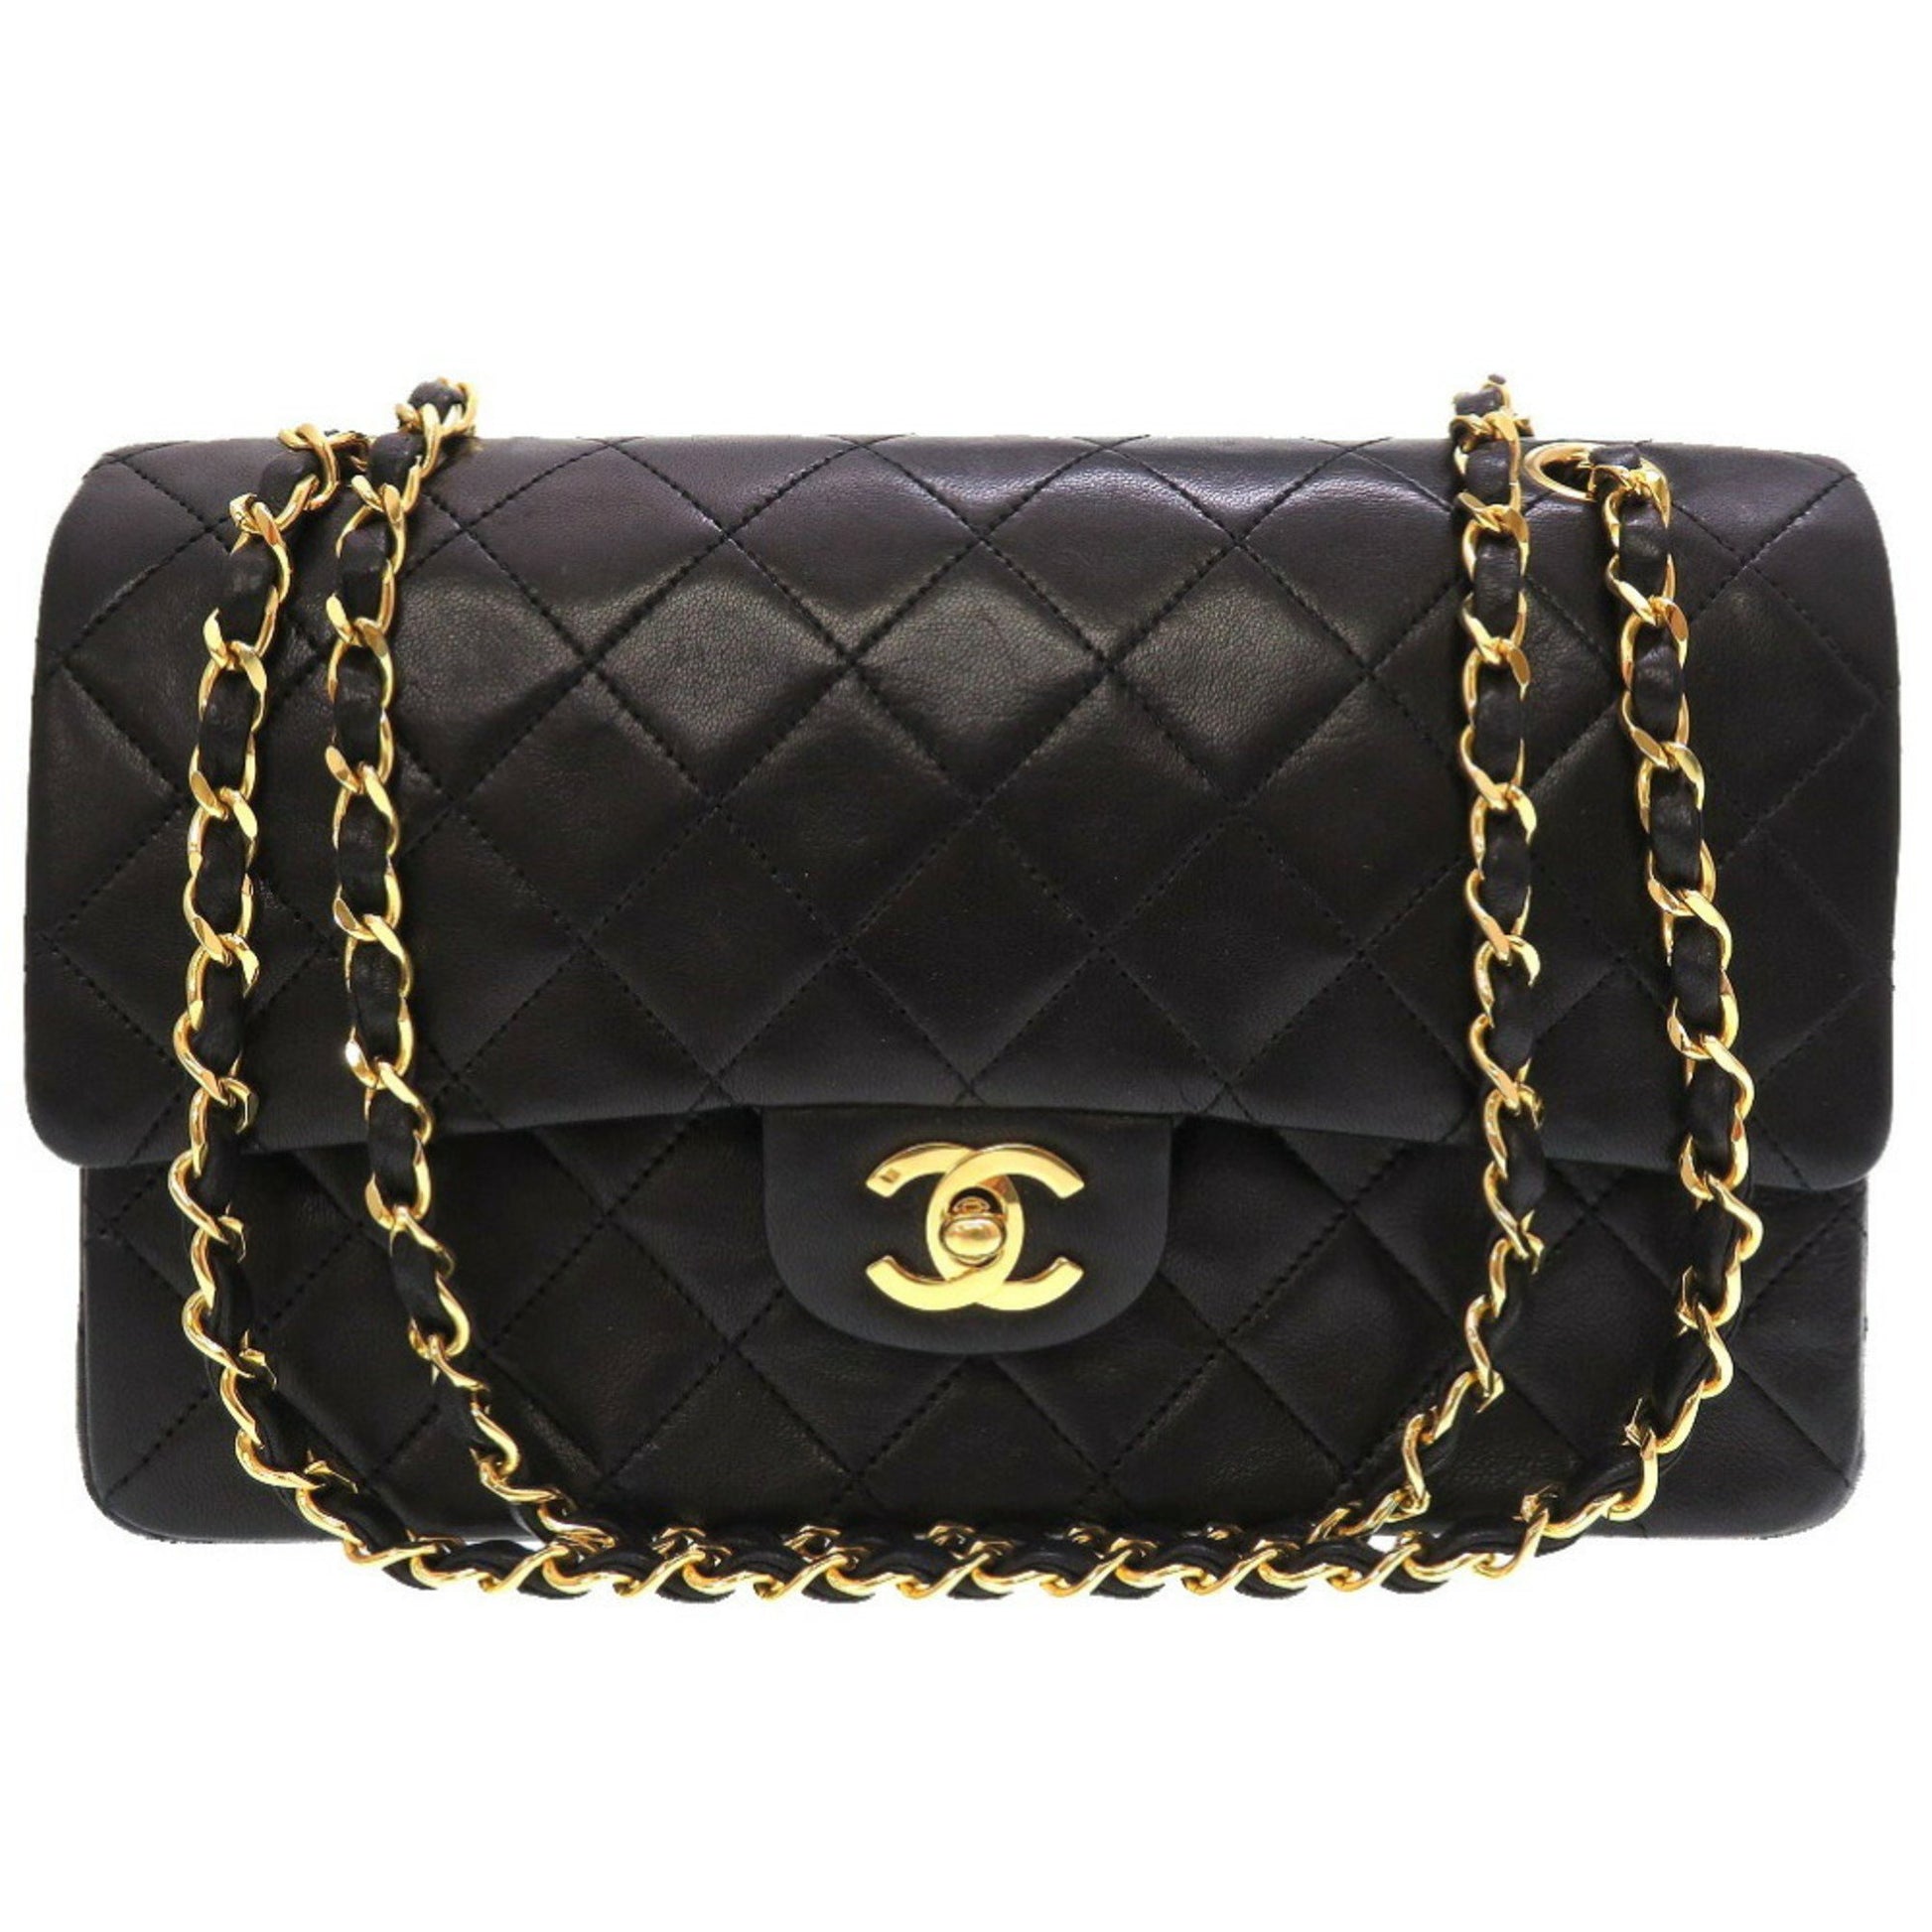 Timeless/classique leather handbag Chanel Black in Leather - 34401473